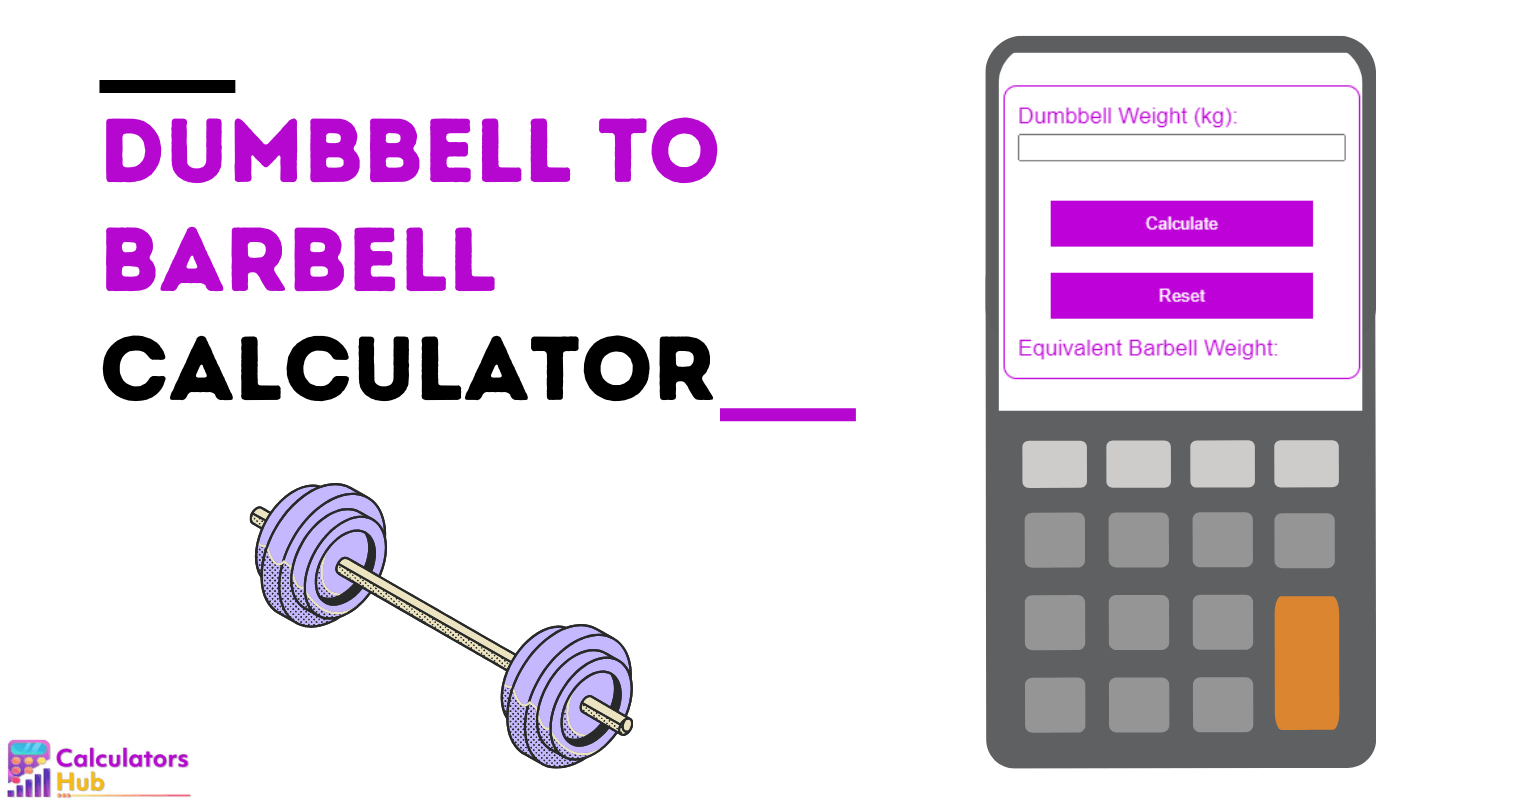 Dumbbell to Barbell Calculator